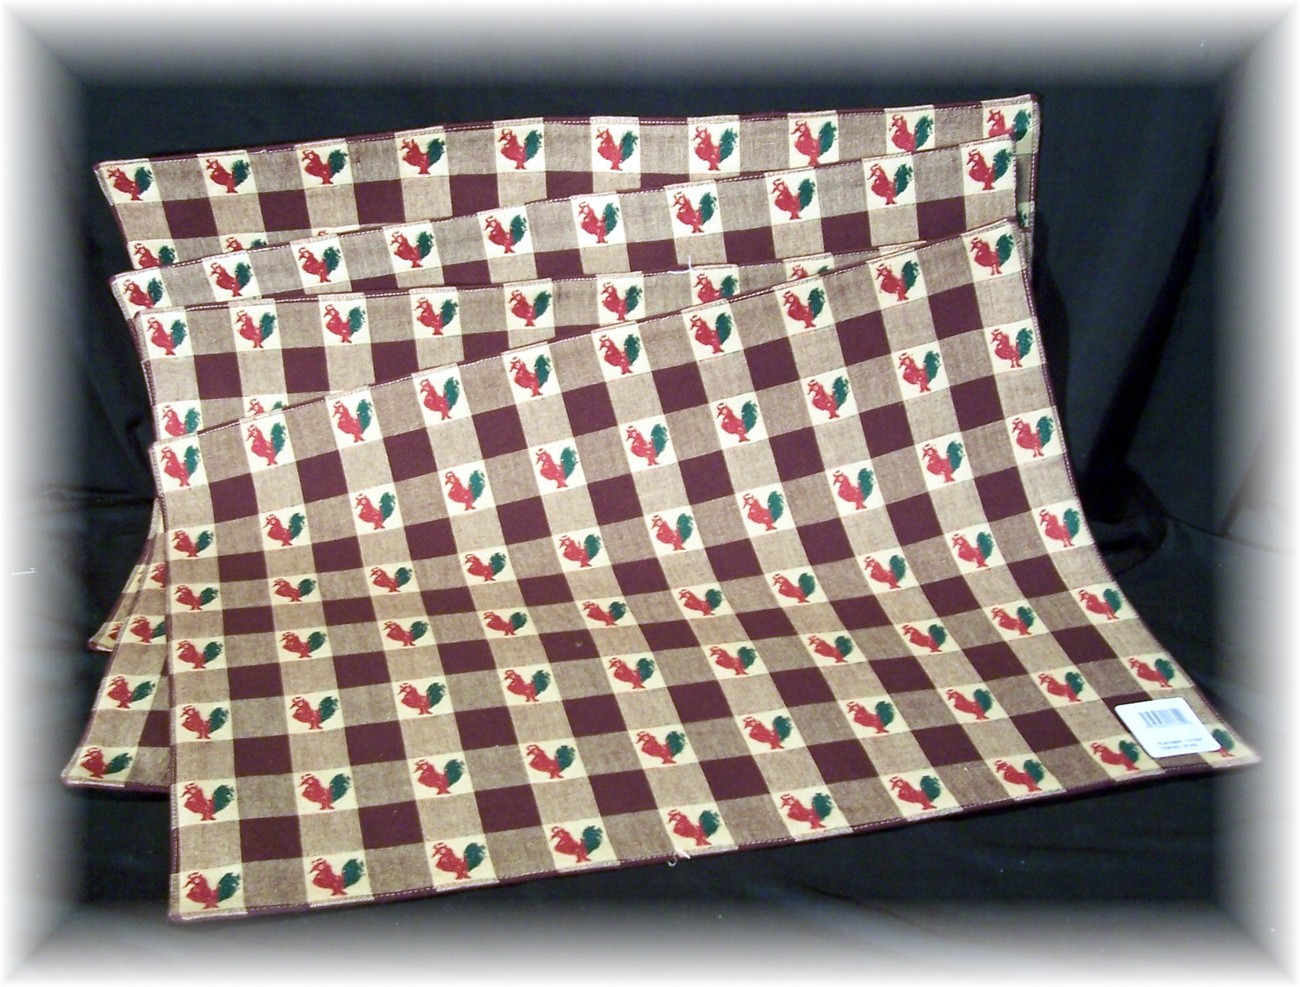  PRiMiTiVe HoMeSpUn Placemats~Embroidered ROOSTER Motif  - $16.95